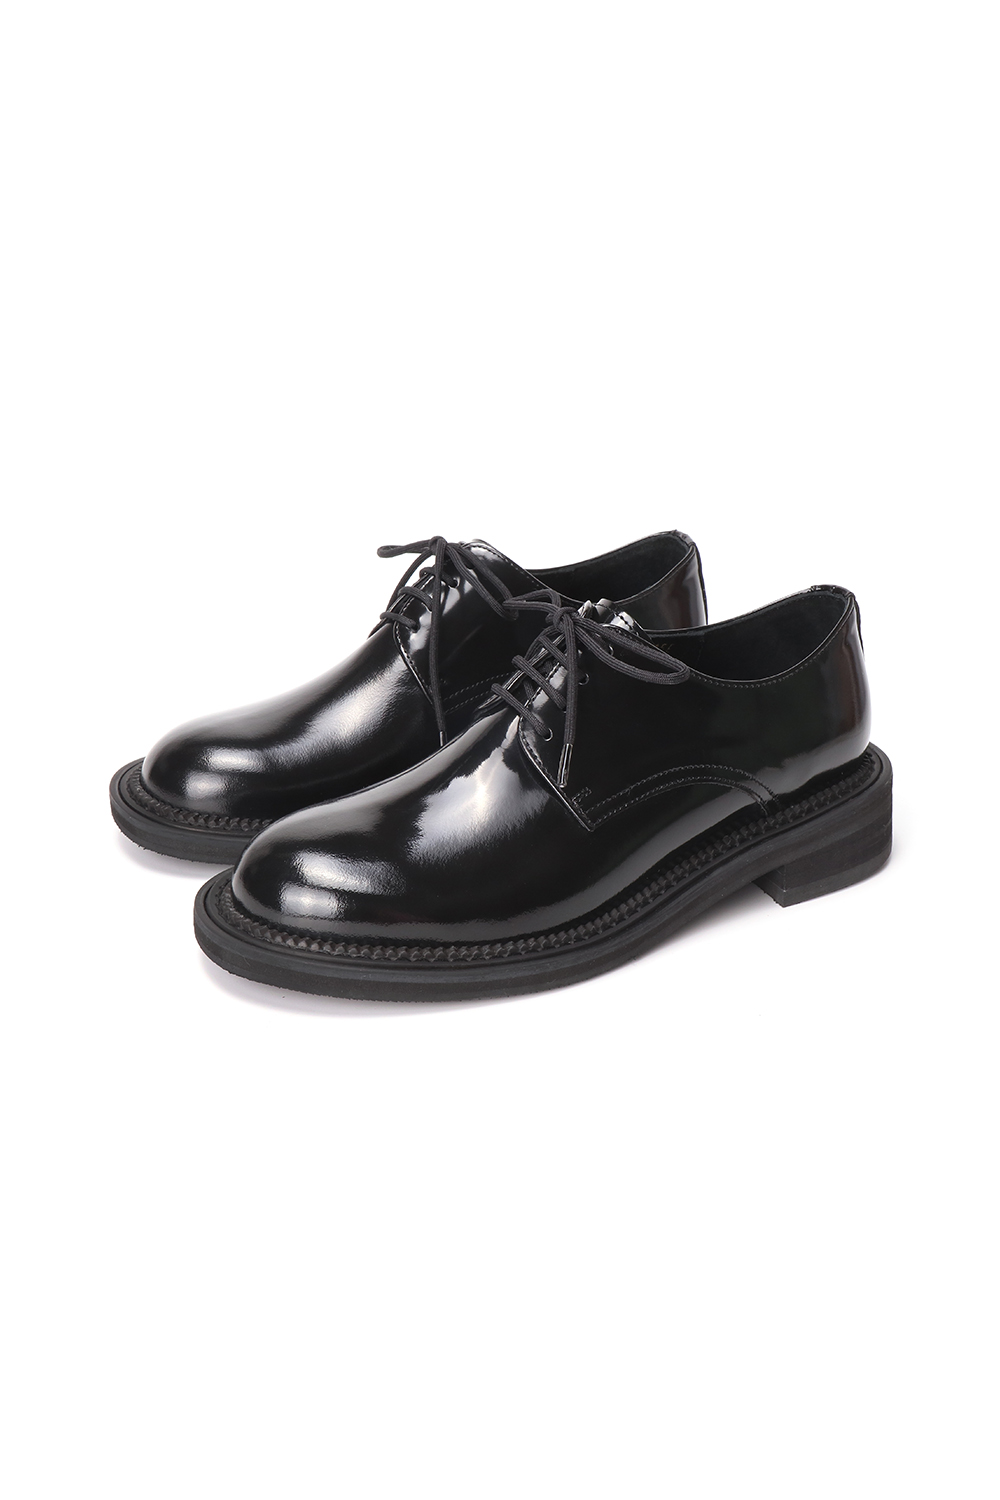 MALO ROUND DERBY SHOES [BLACK]